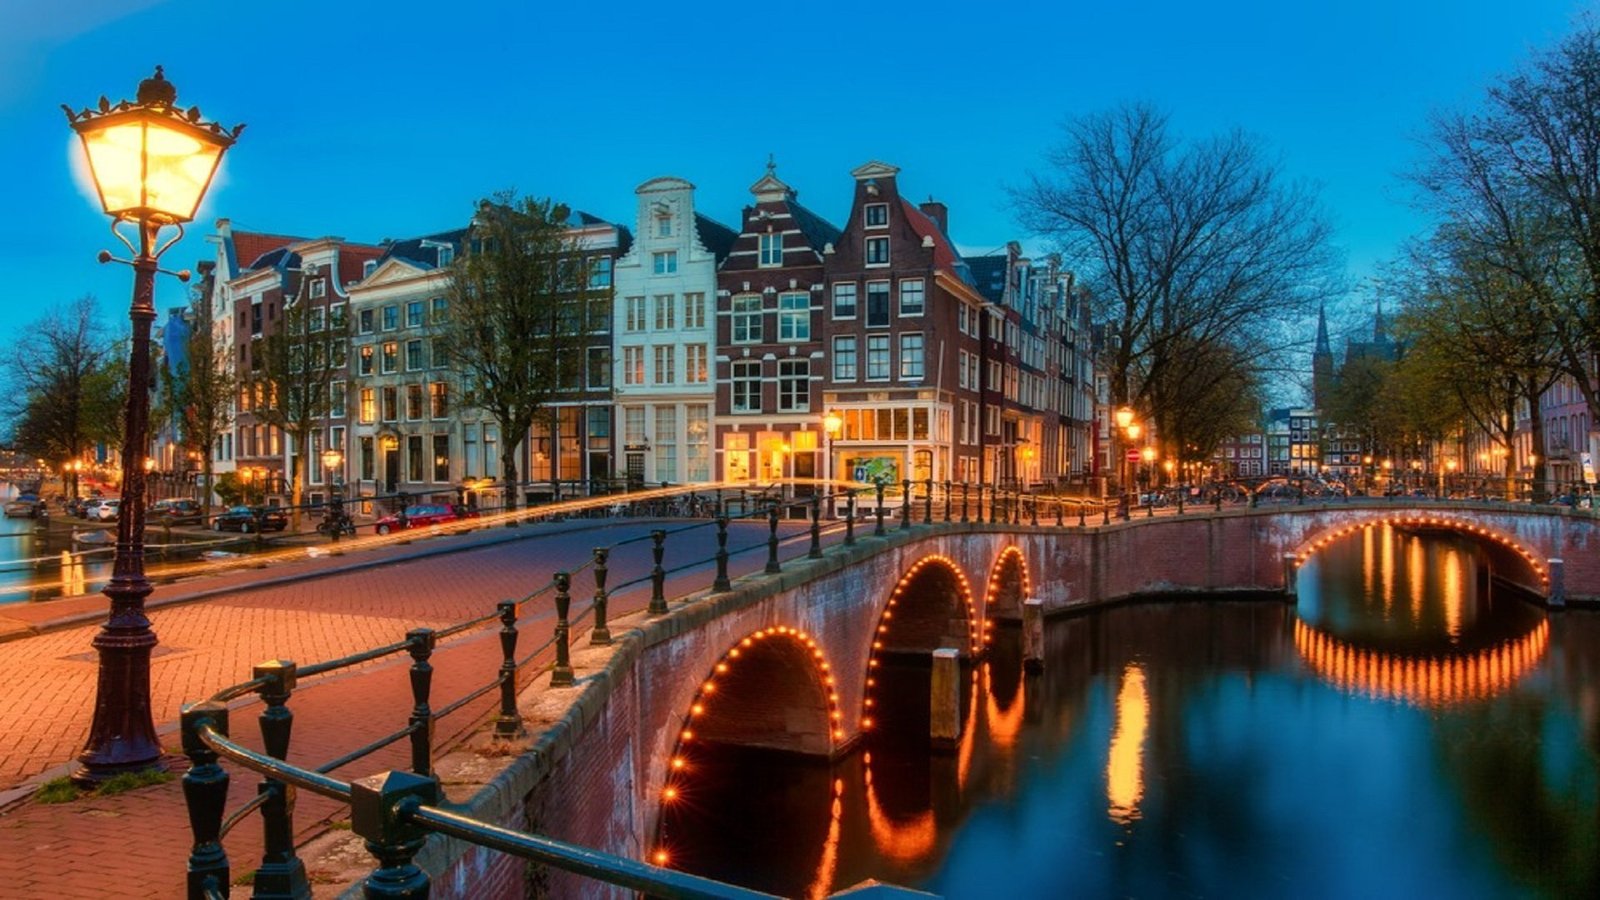 Best Places To Visit In Amsterdam Netherlands Zen Tripstar Amsterdam Vacation Travel Guide Amsterdam attractions Amsterdam g